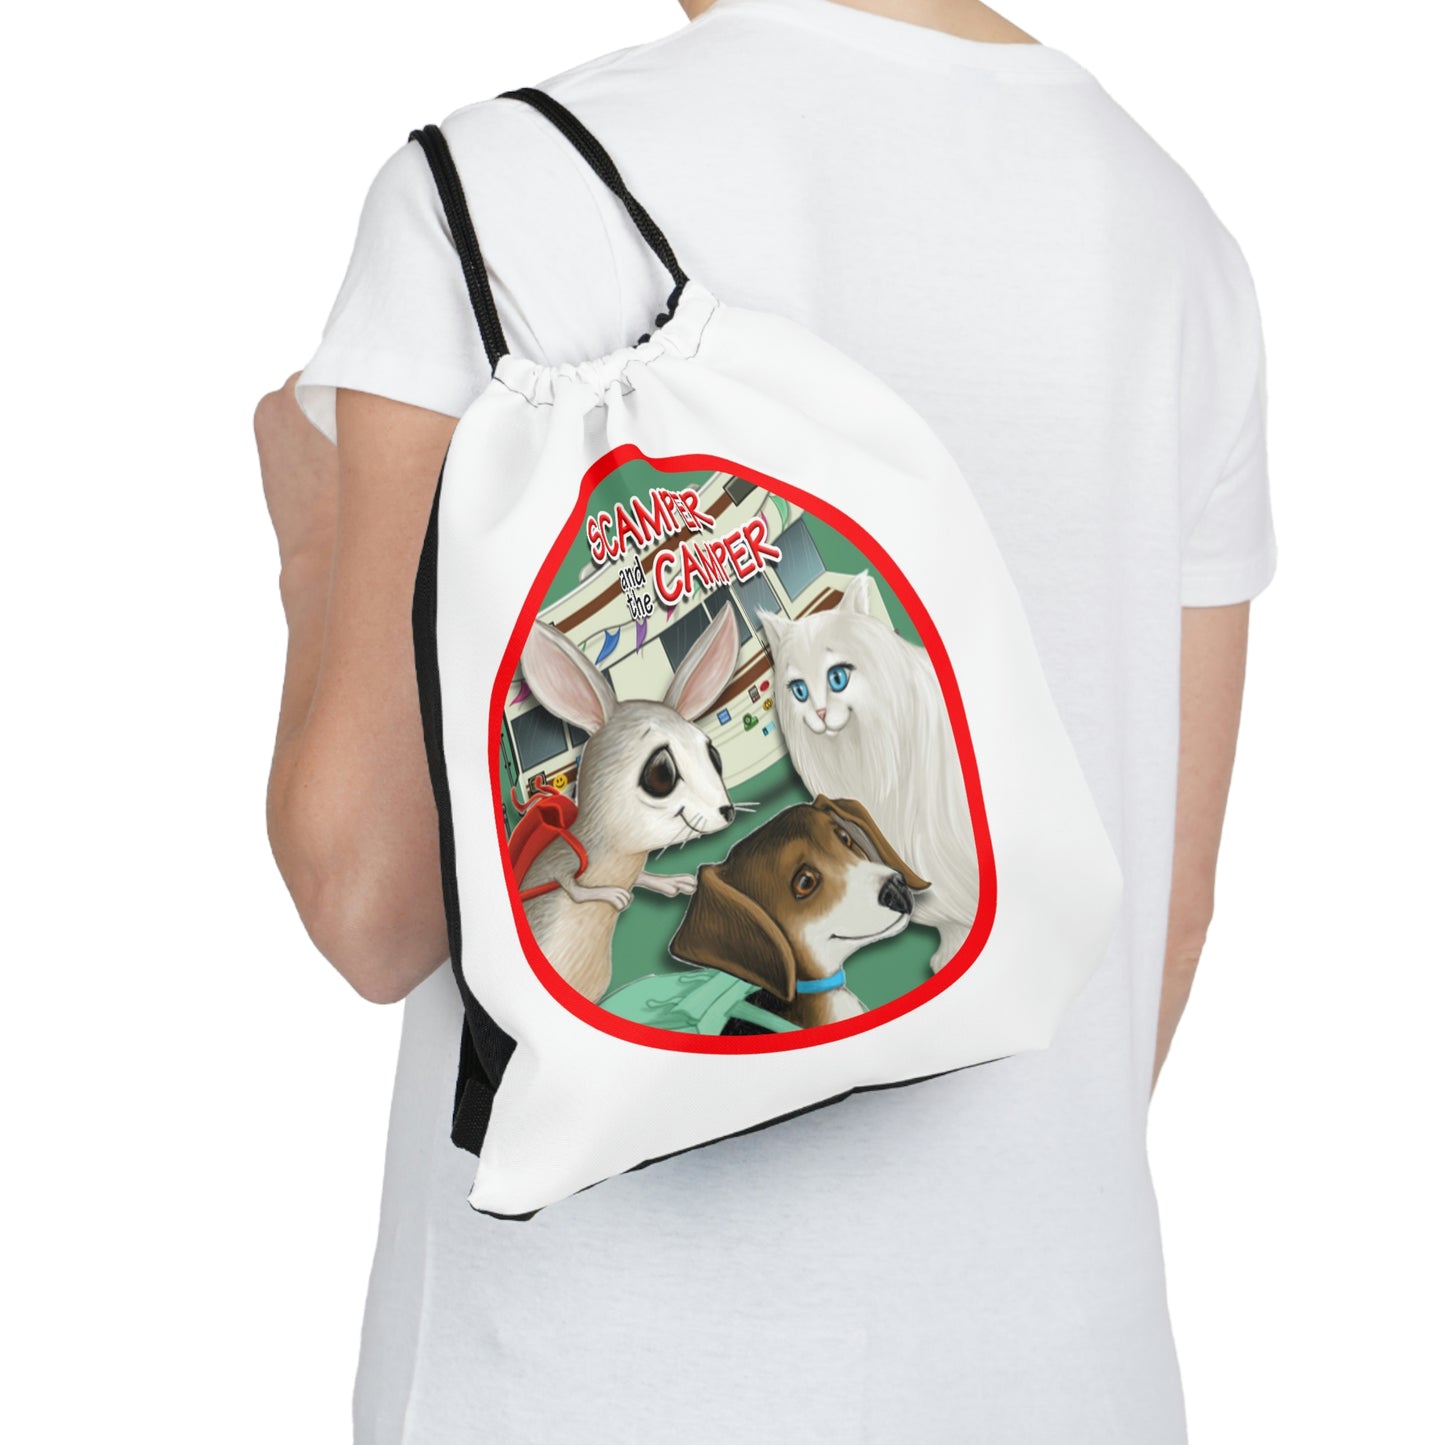 Scamper and Friends Outdoor Drawstring Bag